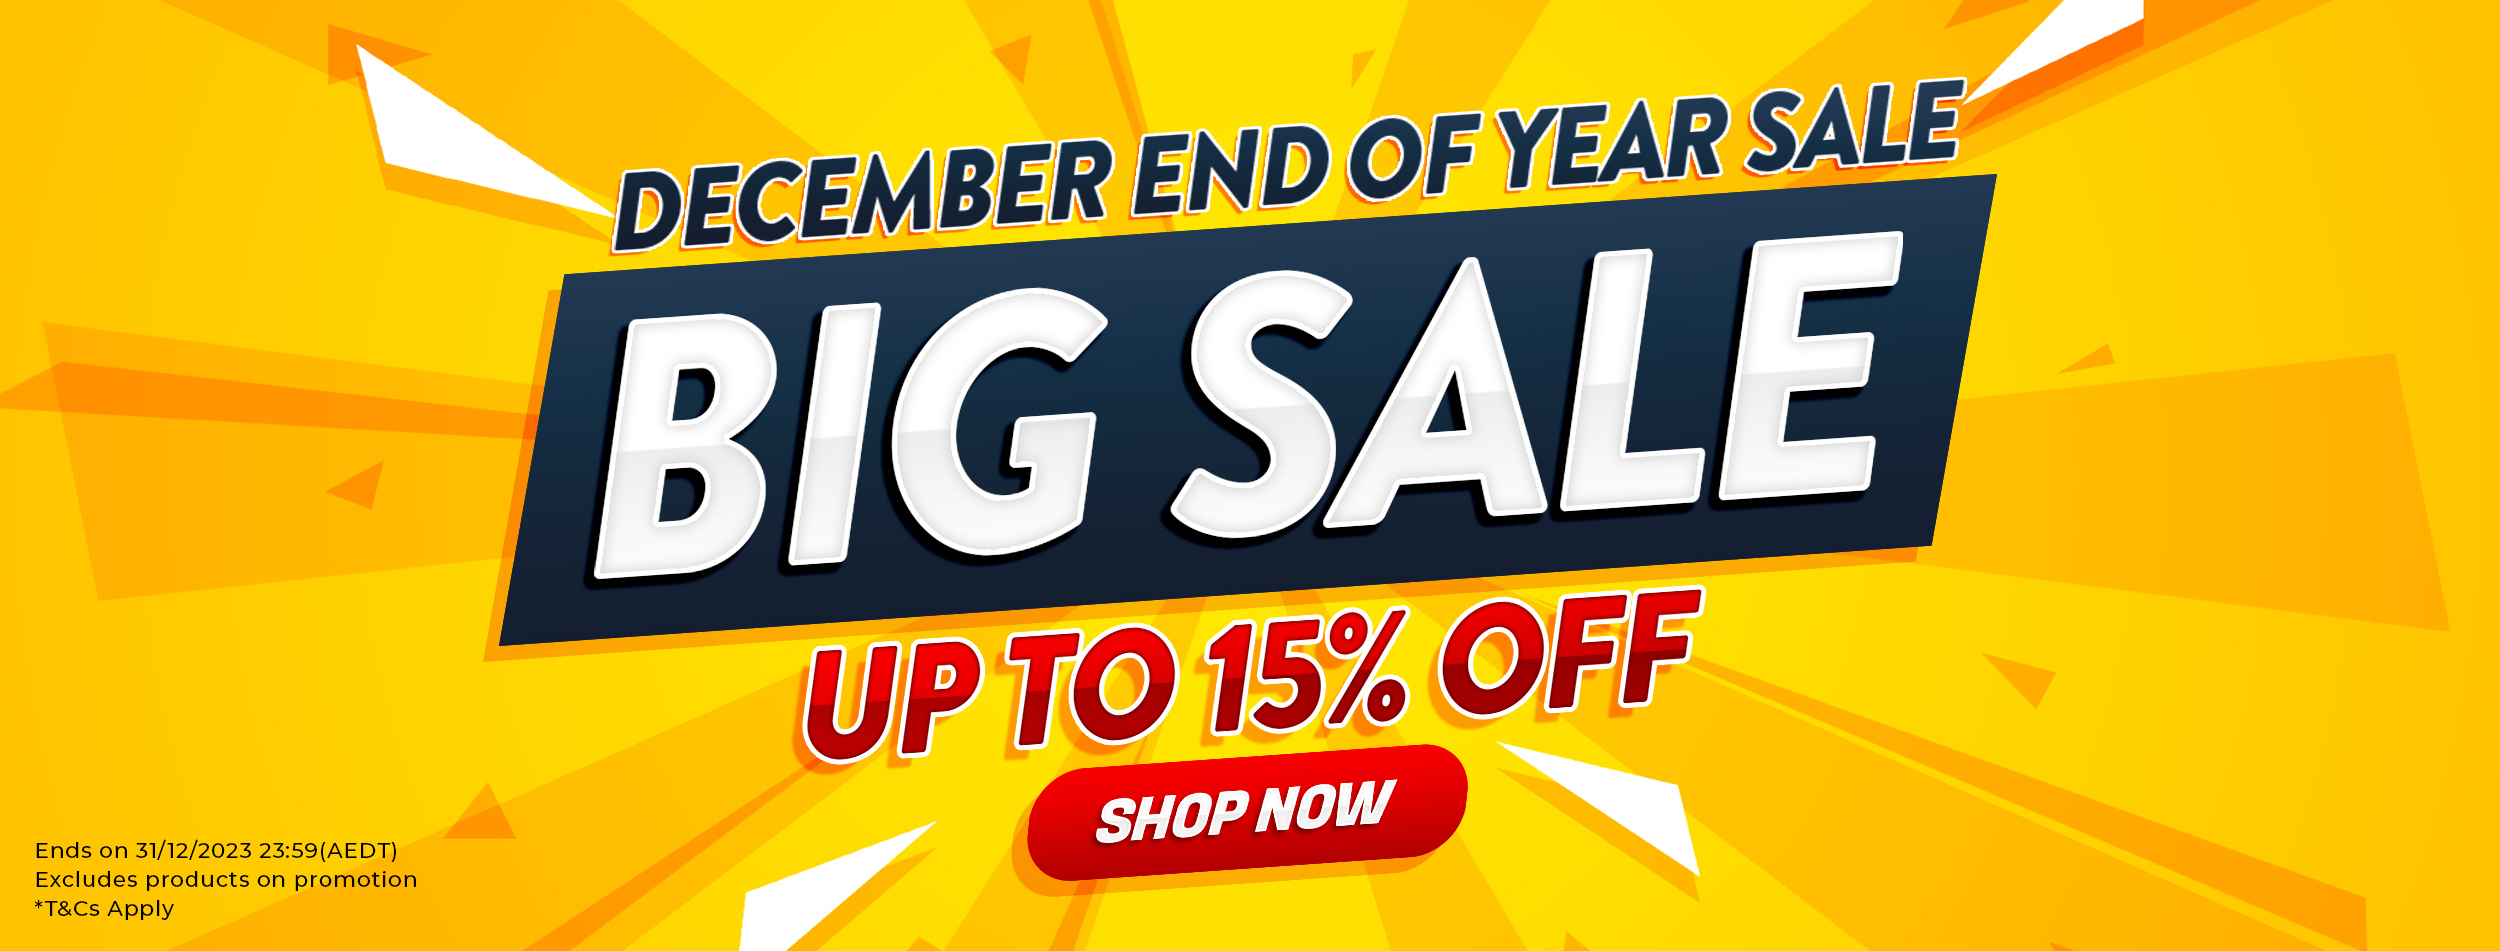 December End of Year Sale 2023 - Up To 15% OFF